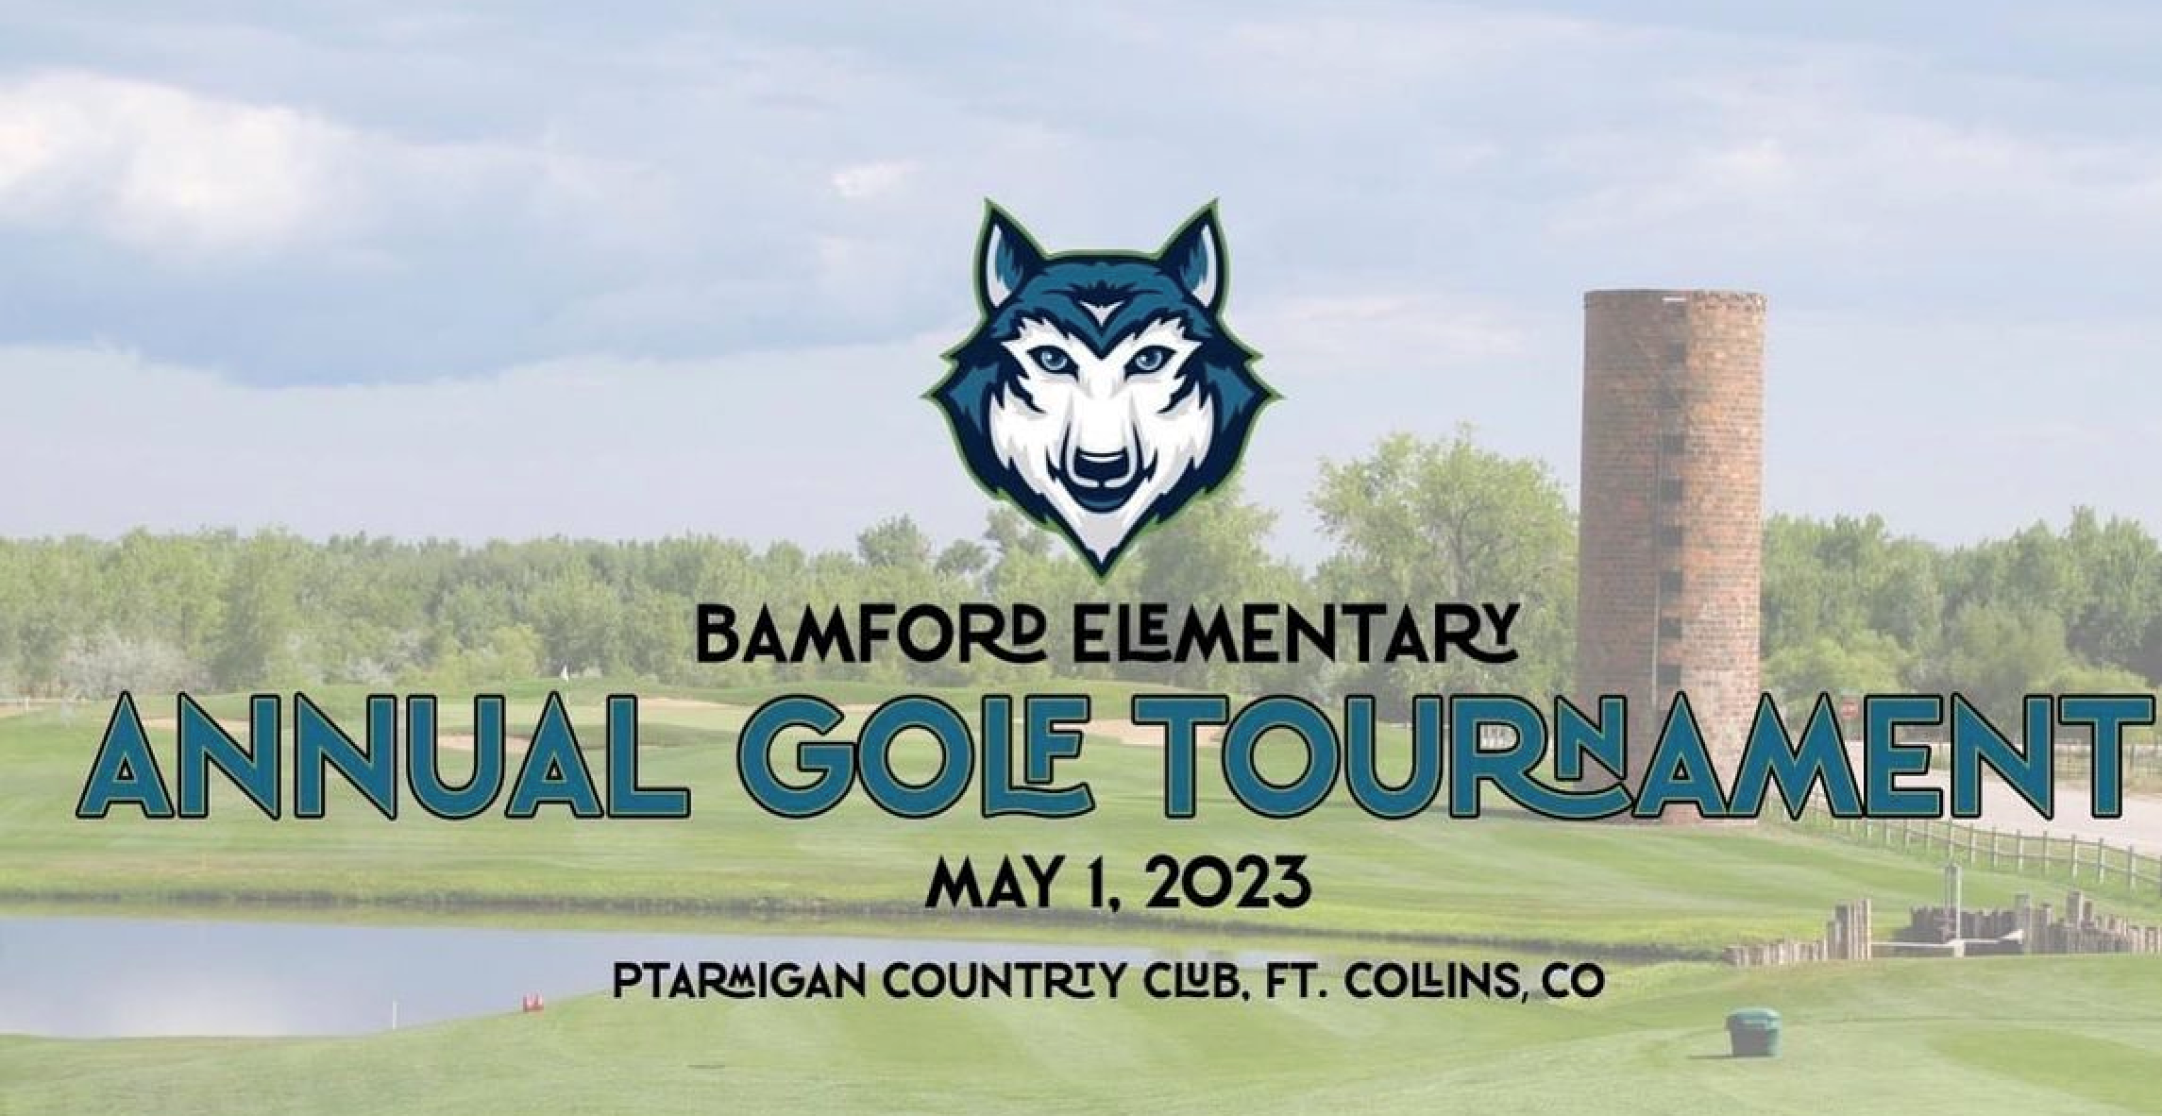 Golf Tournament in May!